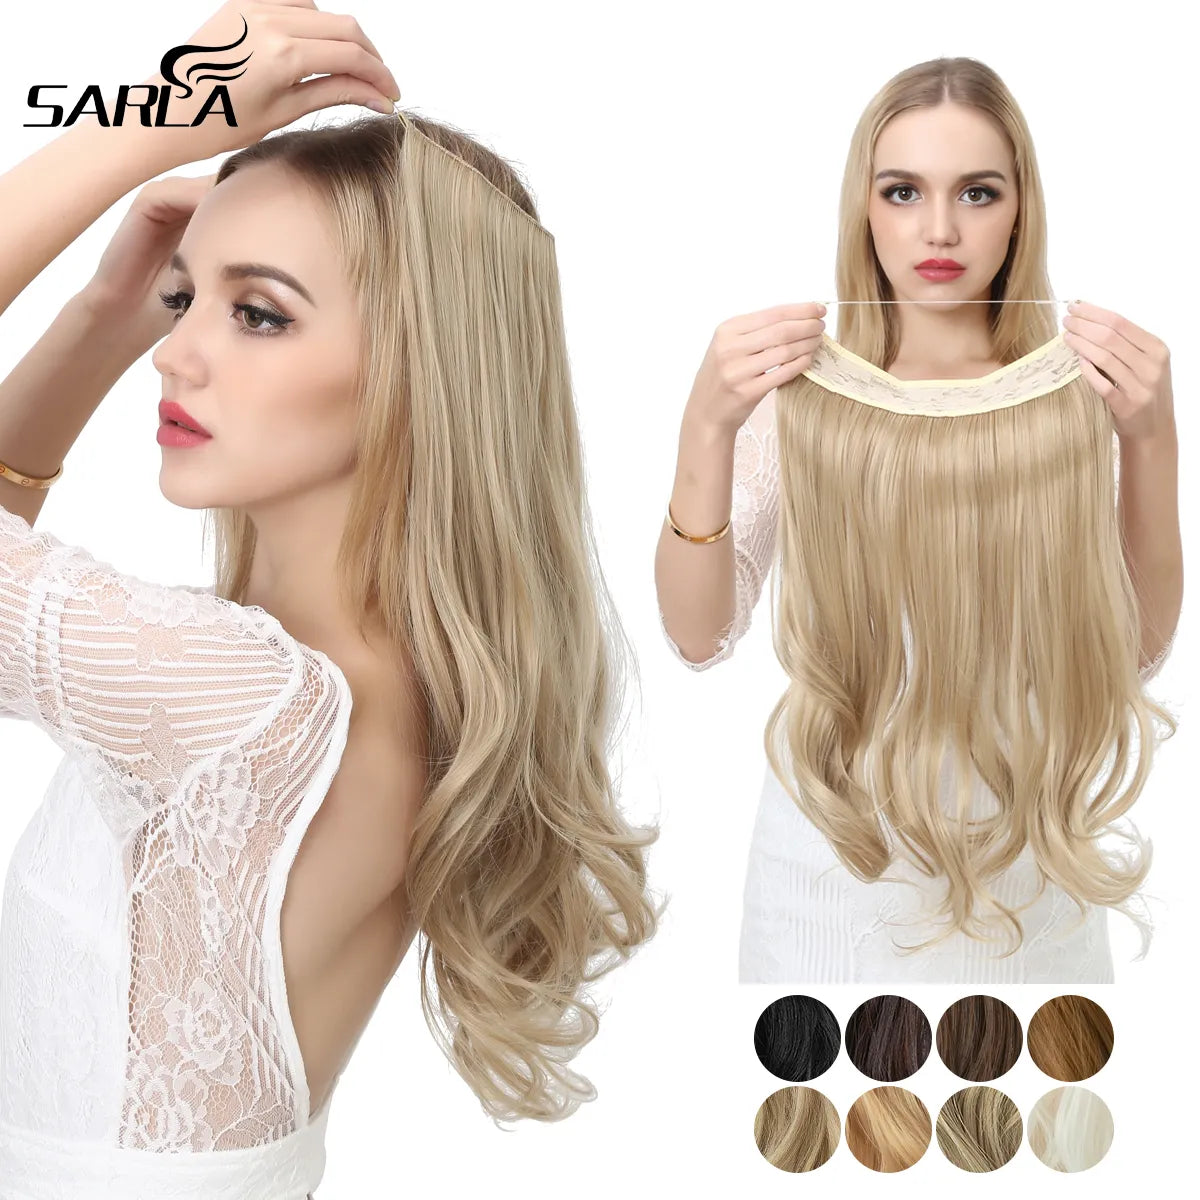 Synthetic No Clip Wave Hair Extensions Ombre Natural Black Blonde Pink One Piece False Hairpiece Fish Line Fake Hair Piece